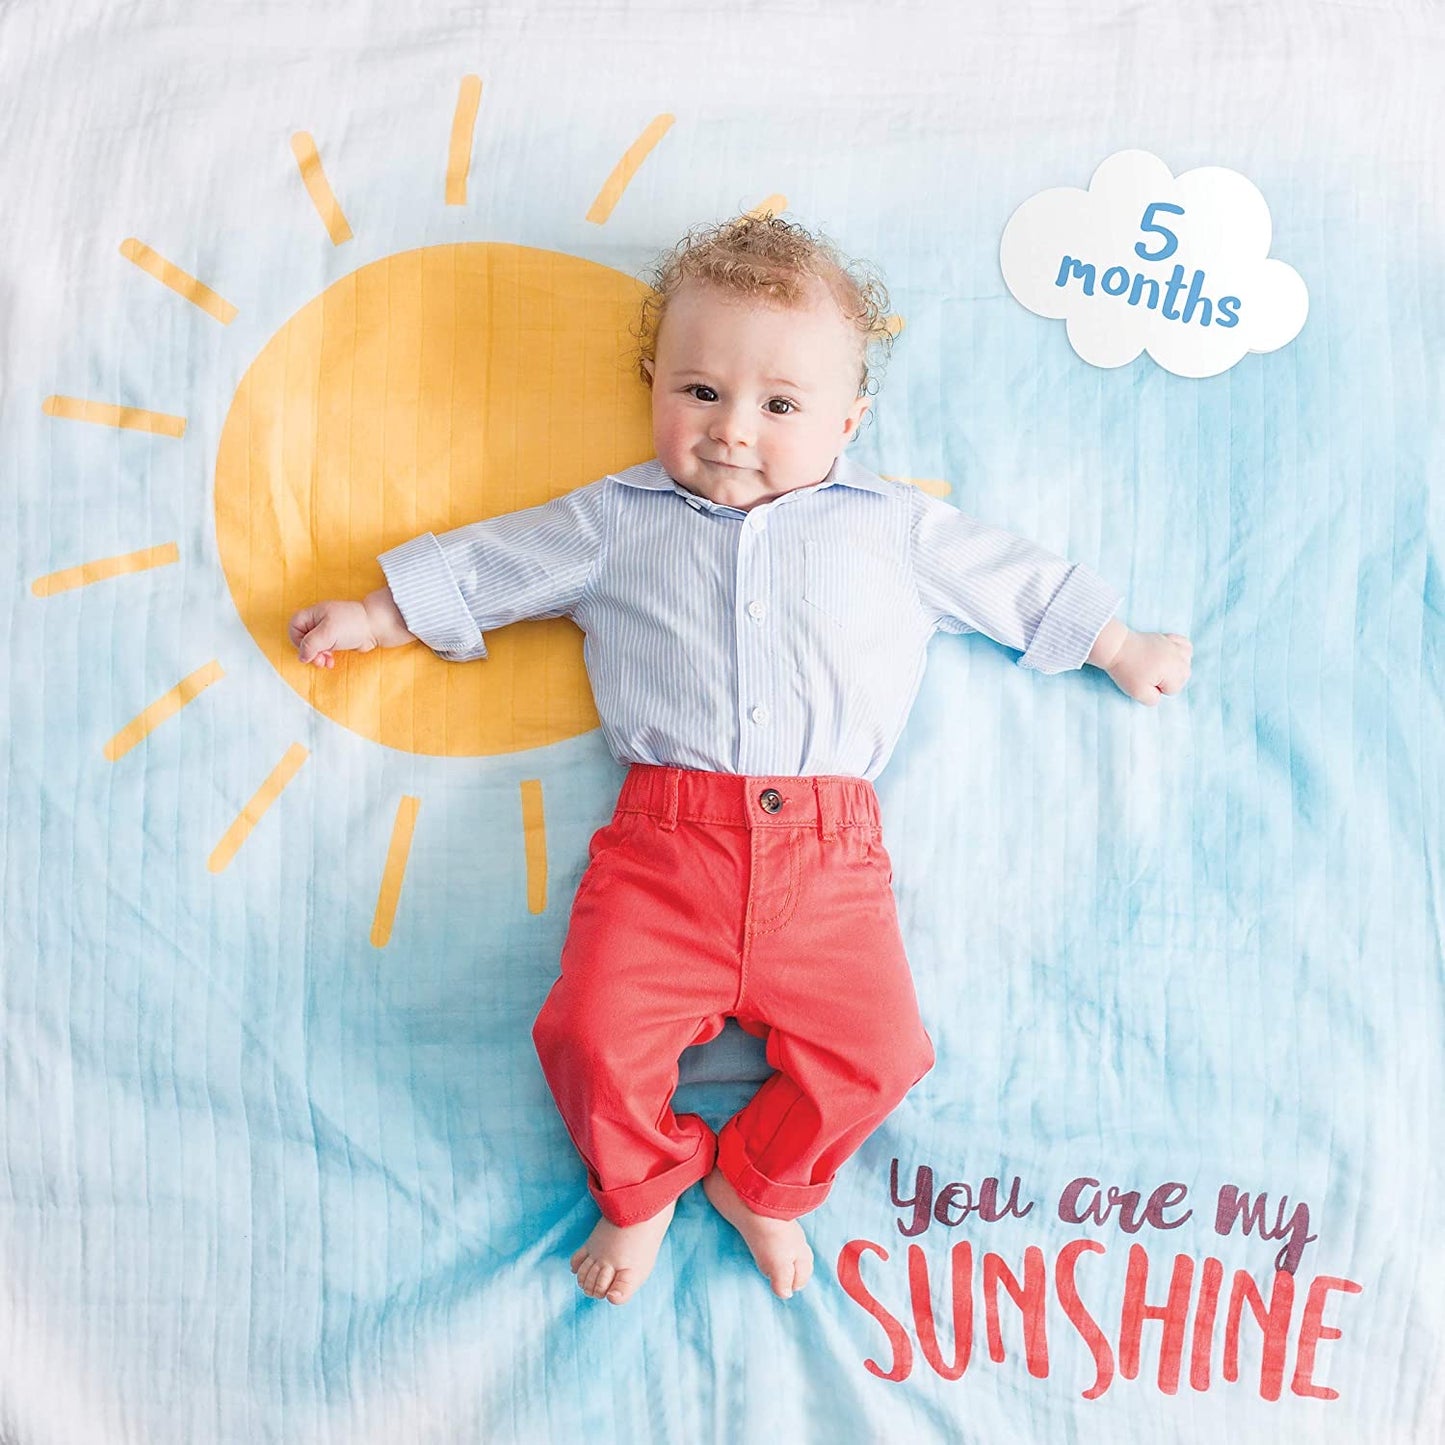 Baby’s First Year - You Are My Sunshine - Blanket & Card Set